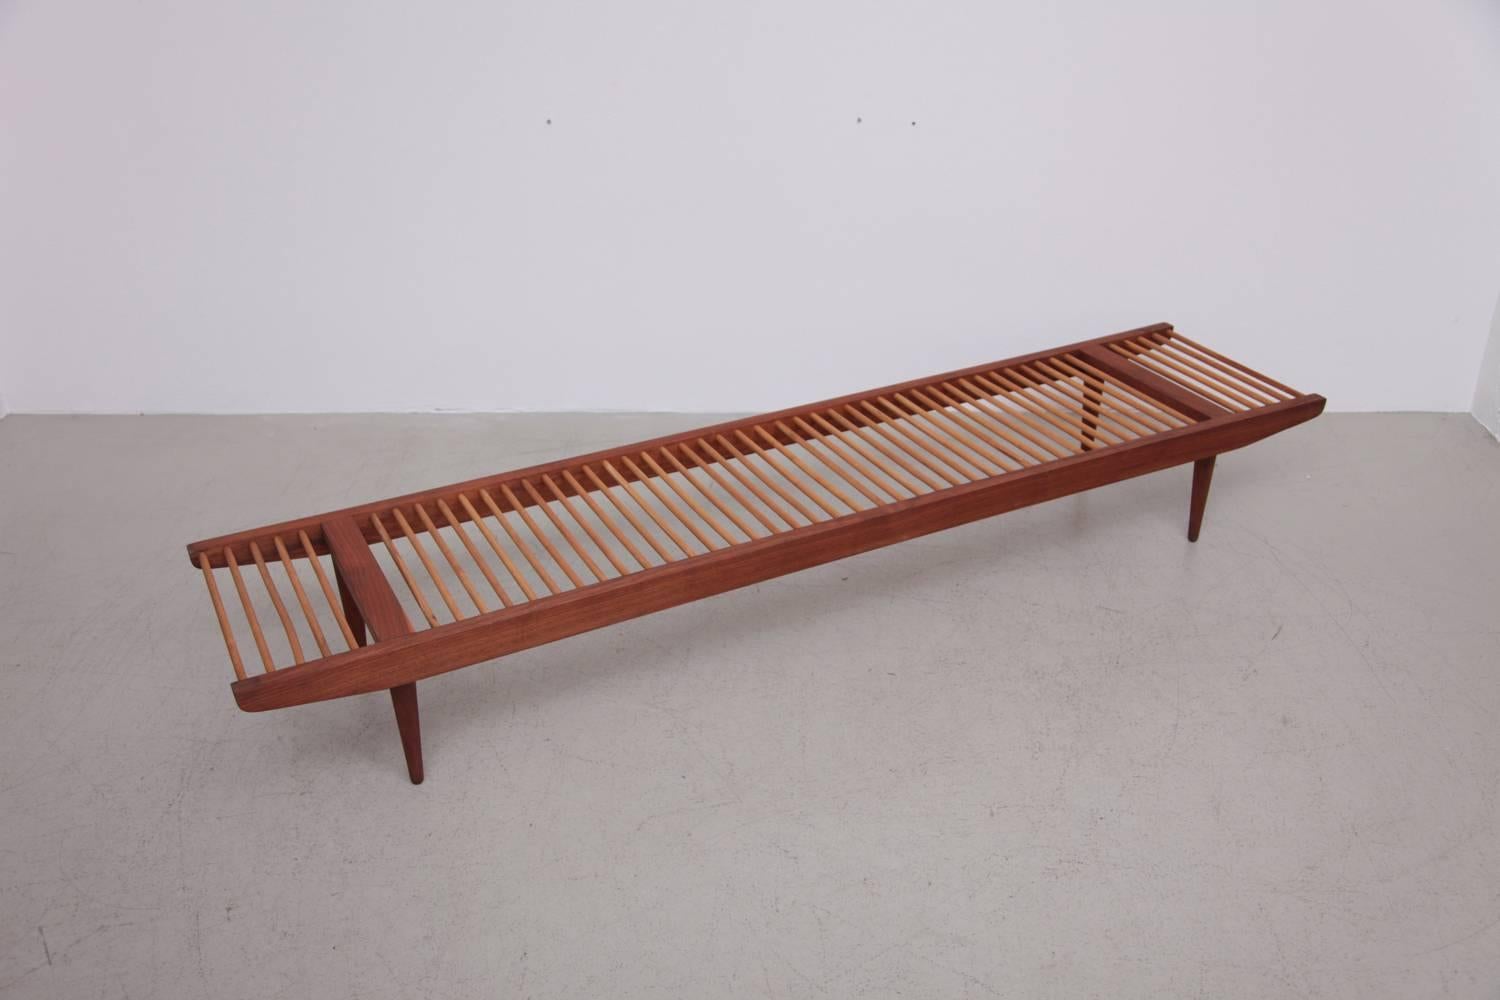 California modern bench or coffee table, designed by Milo Baughman for Glenn of California, circa 1950s in excellent condition.